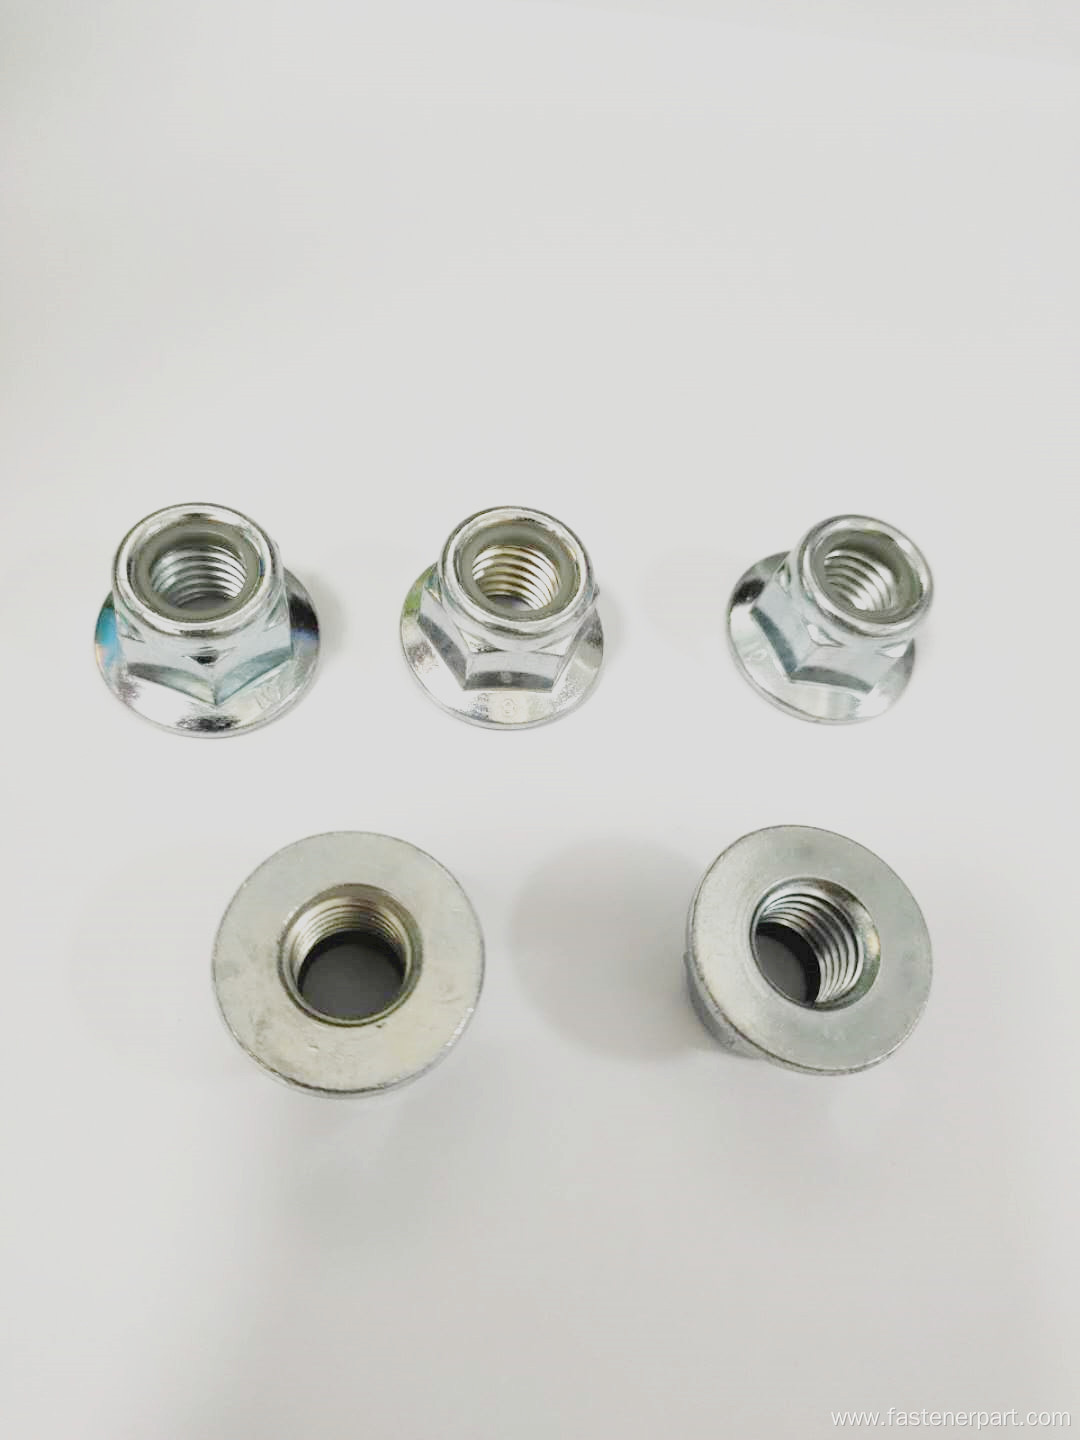 Standard Size Clamp Flange Lock Nuts For Rims